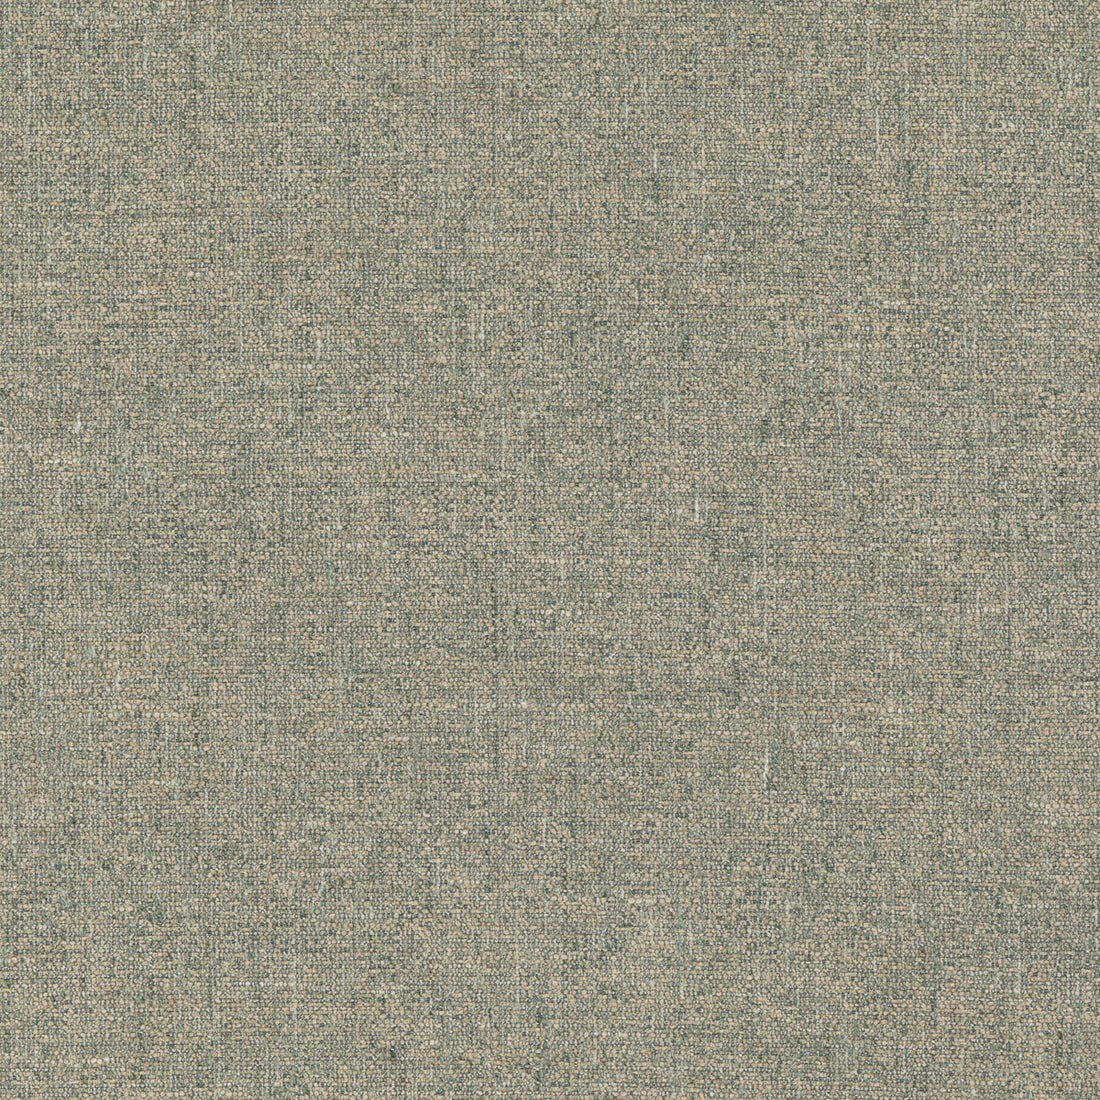 Loxley fabric in teal color - pattern BF10876.615.0 - by G P &amp; J Baker in the Essential Colours II collection